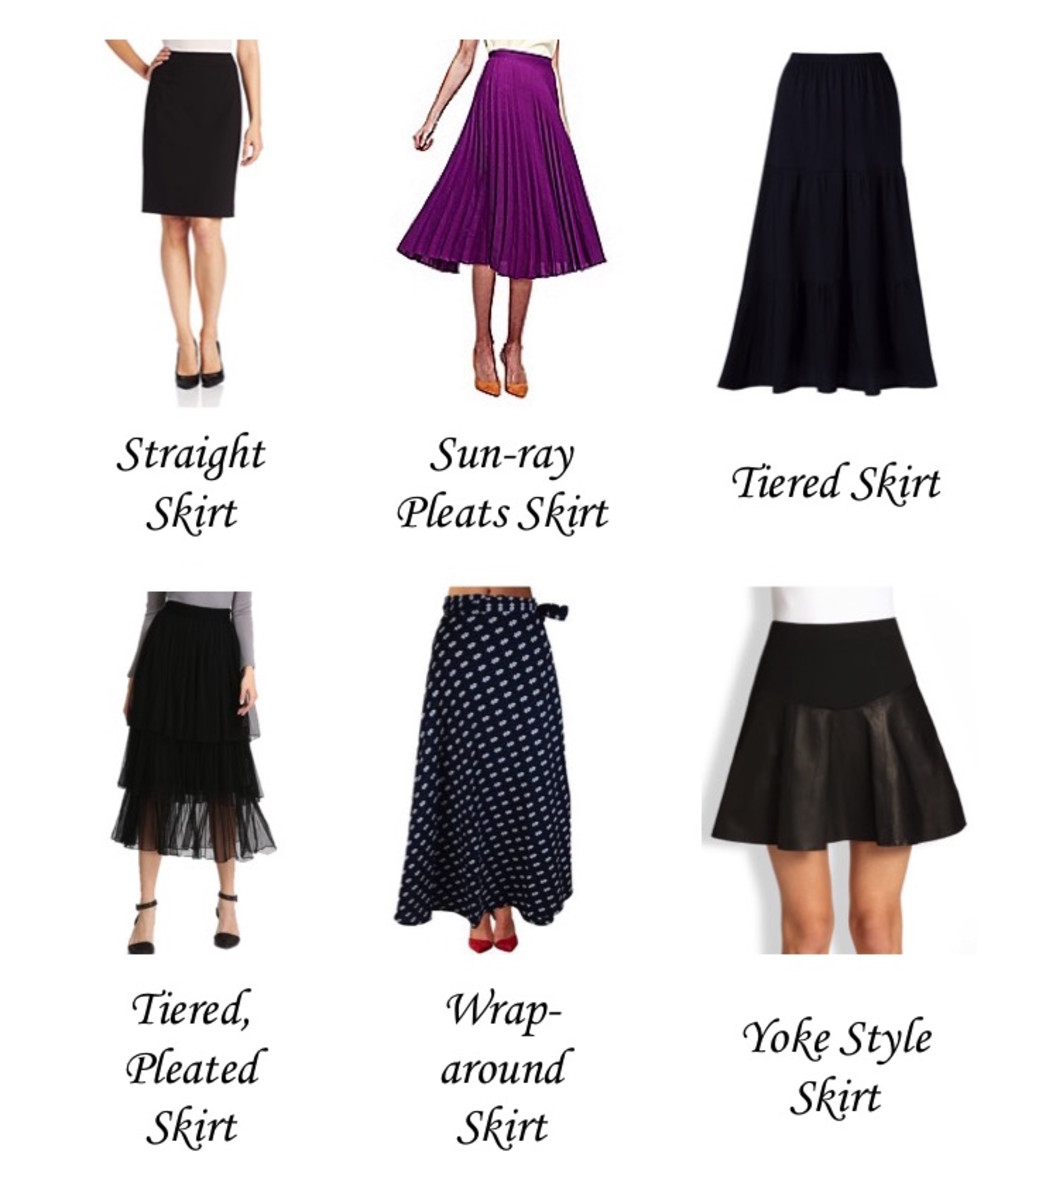 S-K skirt styles are shown above.